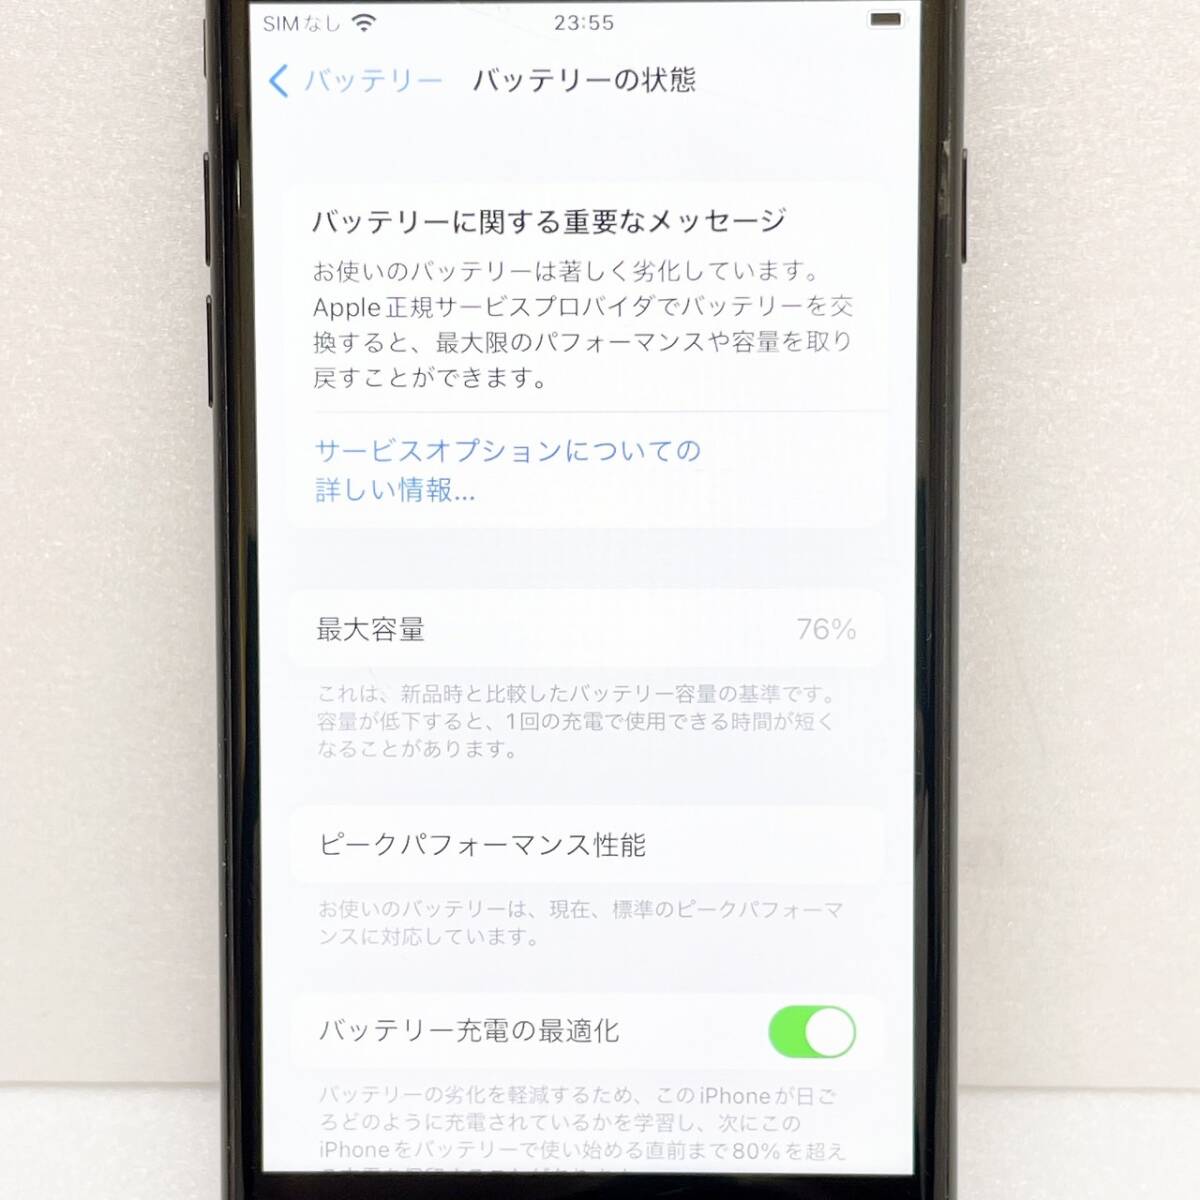 【DHS1990AT】iPhone7 32GB MNCE2J/A A1779 ブラック 判定○ SIMロックあり 表示 IMEI:355851083564556 画面割れありの画像7